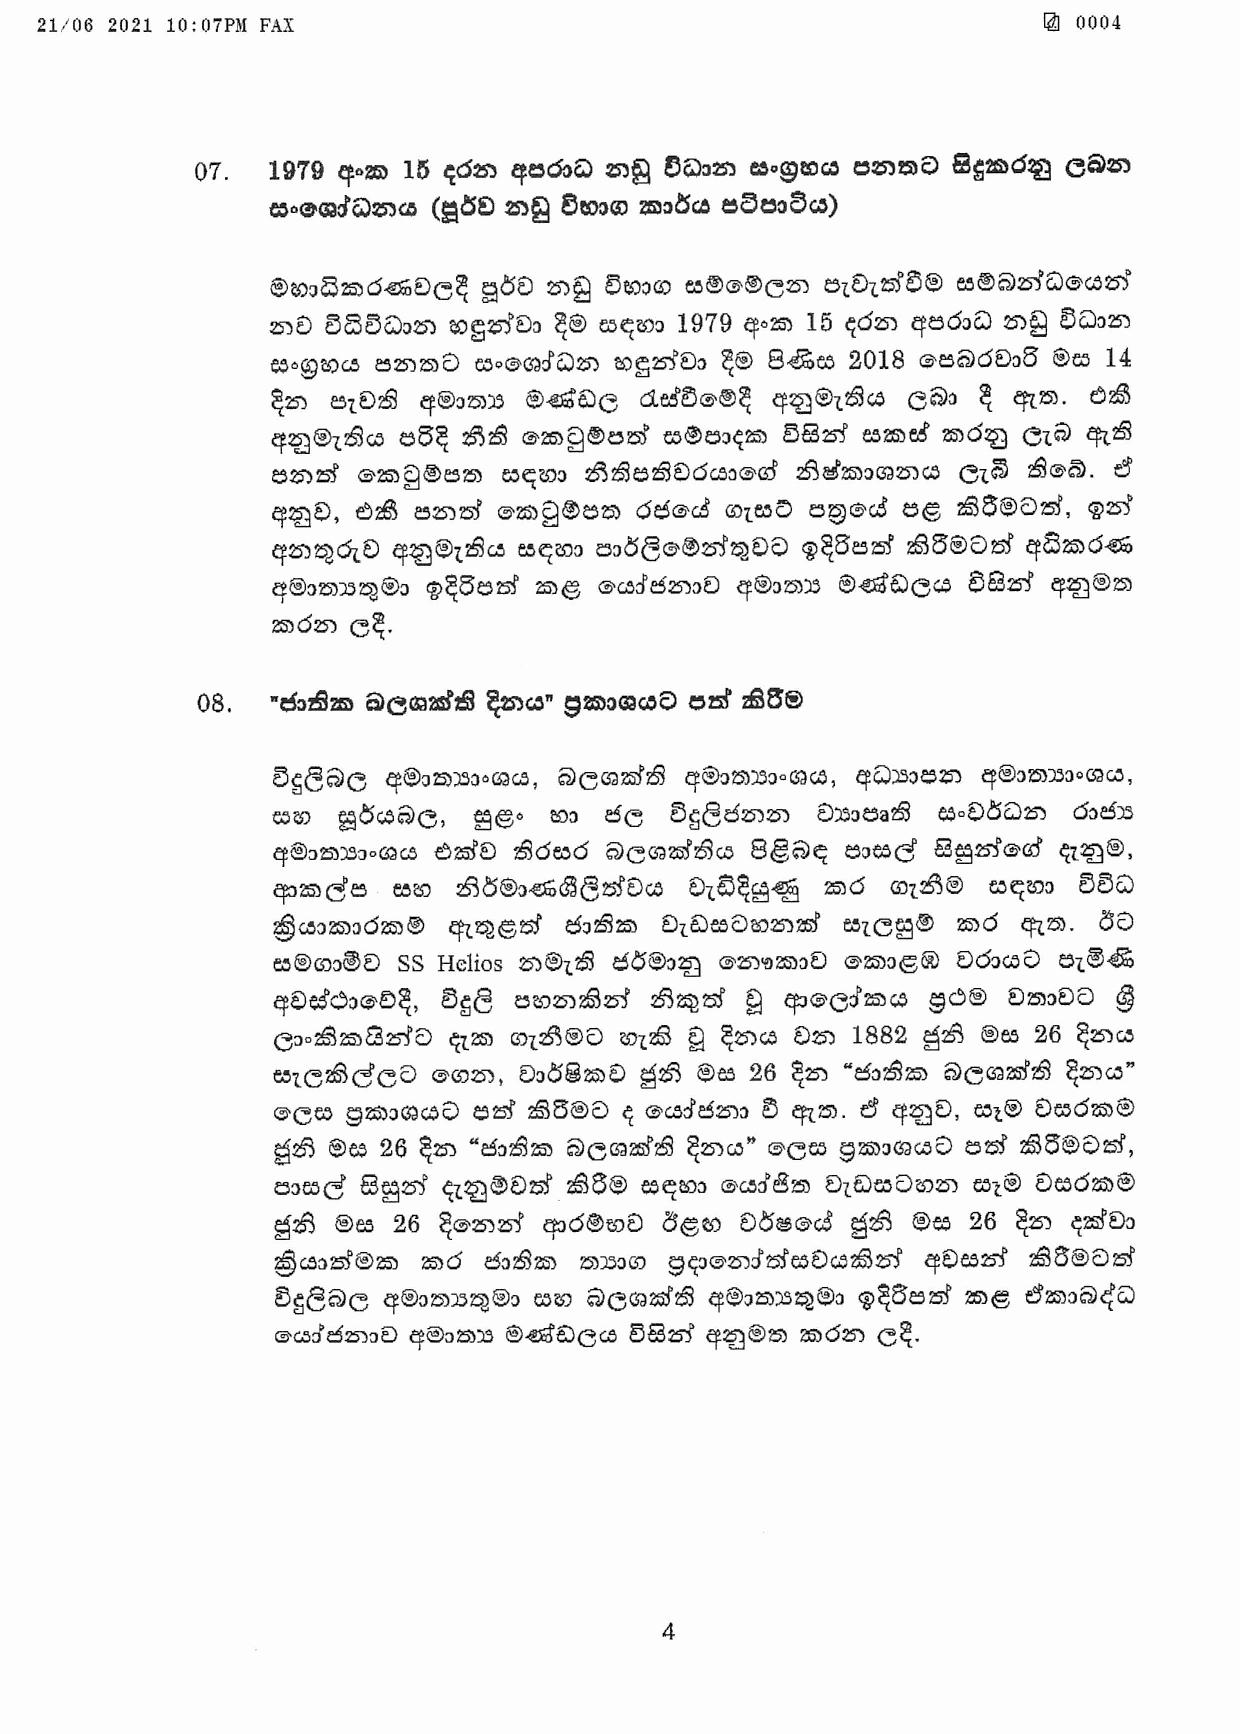 Cabinet Decision on 21.06.2021 page 004